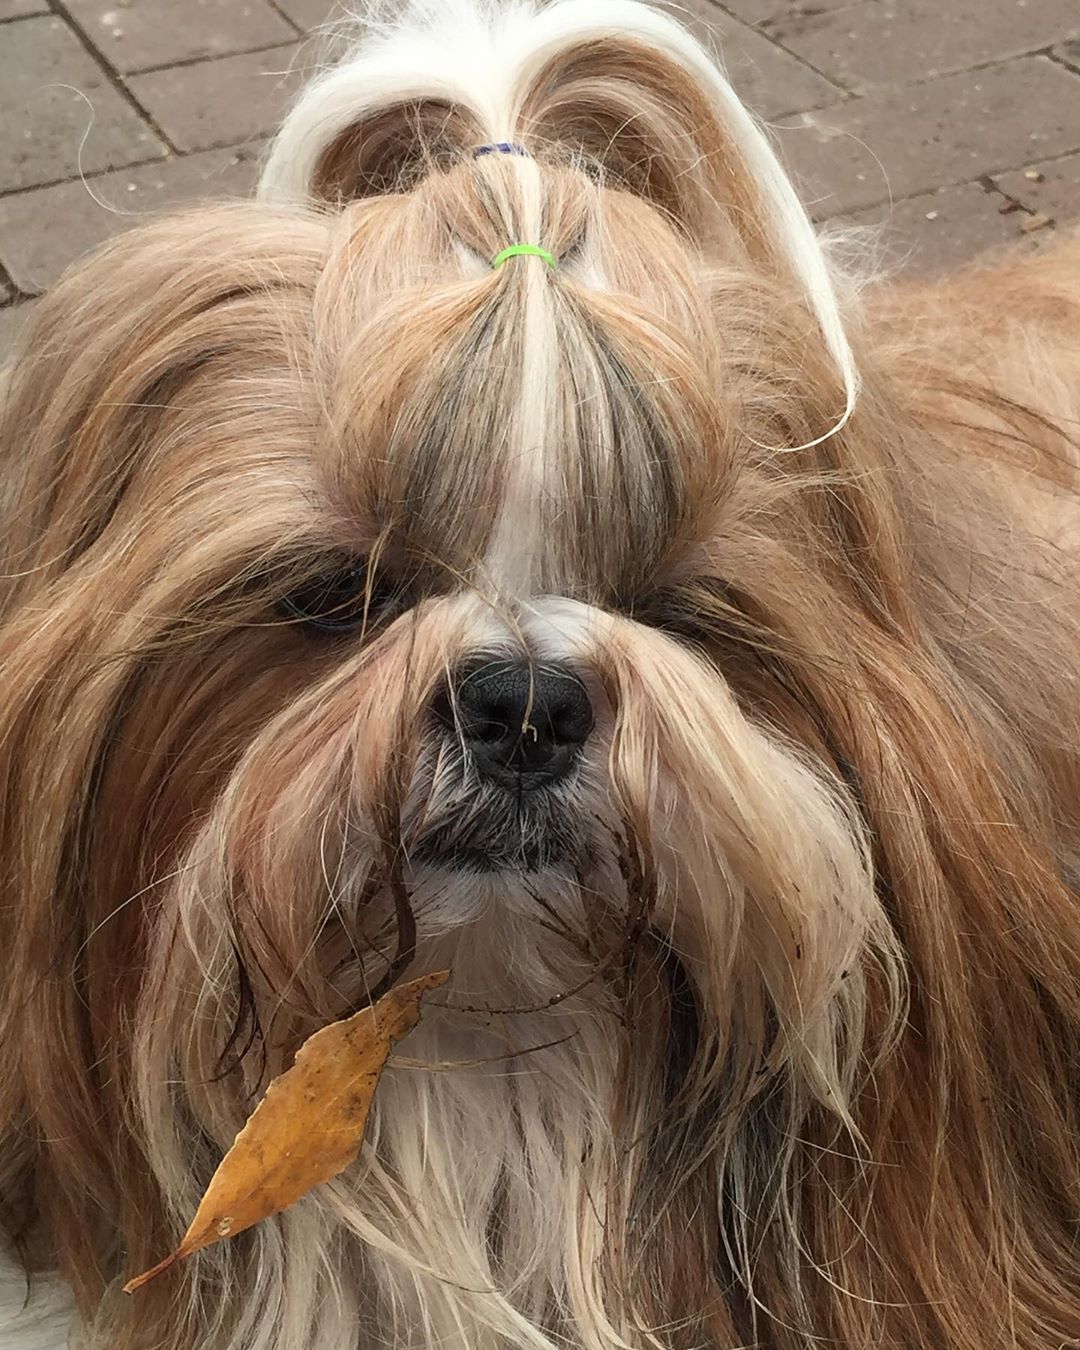 grumpy face of a Shih Tzu with dried leaf stuck on its long hair.